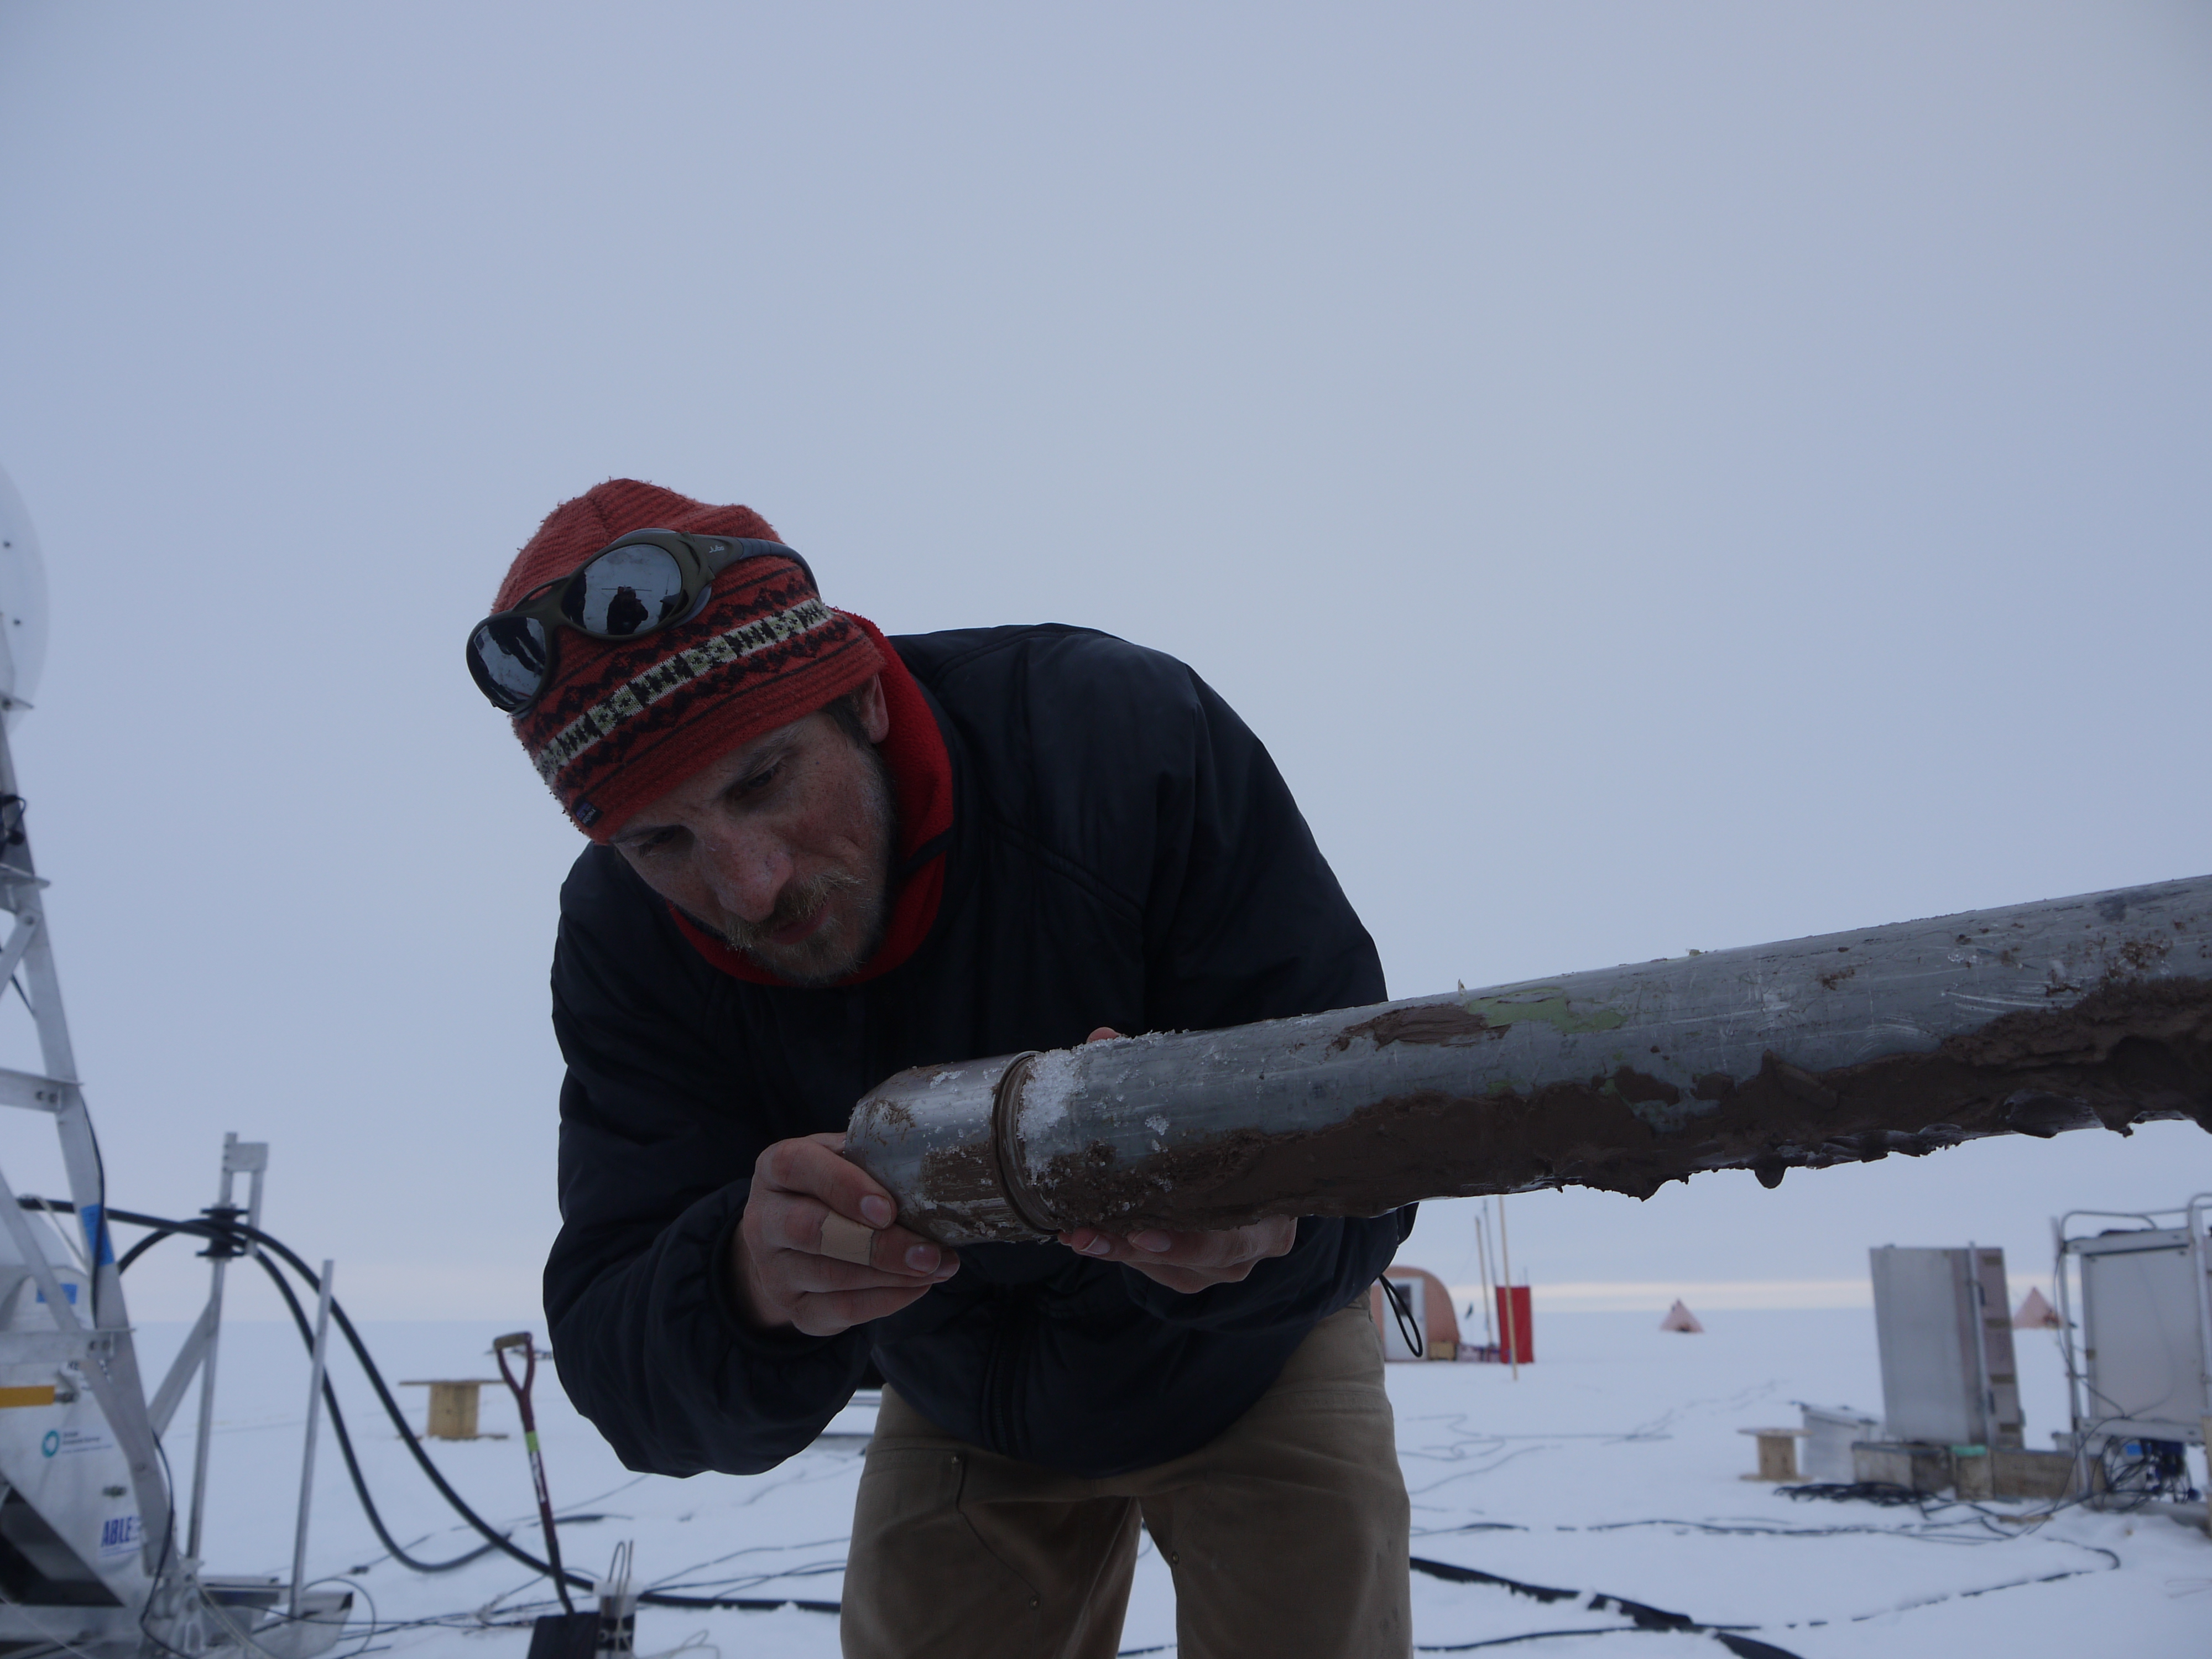 Marine geologist Dr James Smith inspects sediment core recovered from beneath 500m thick ice shelf